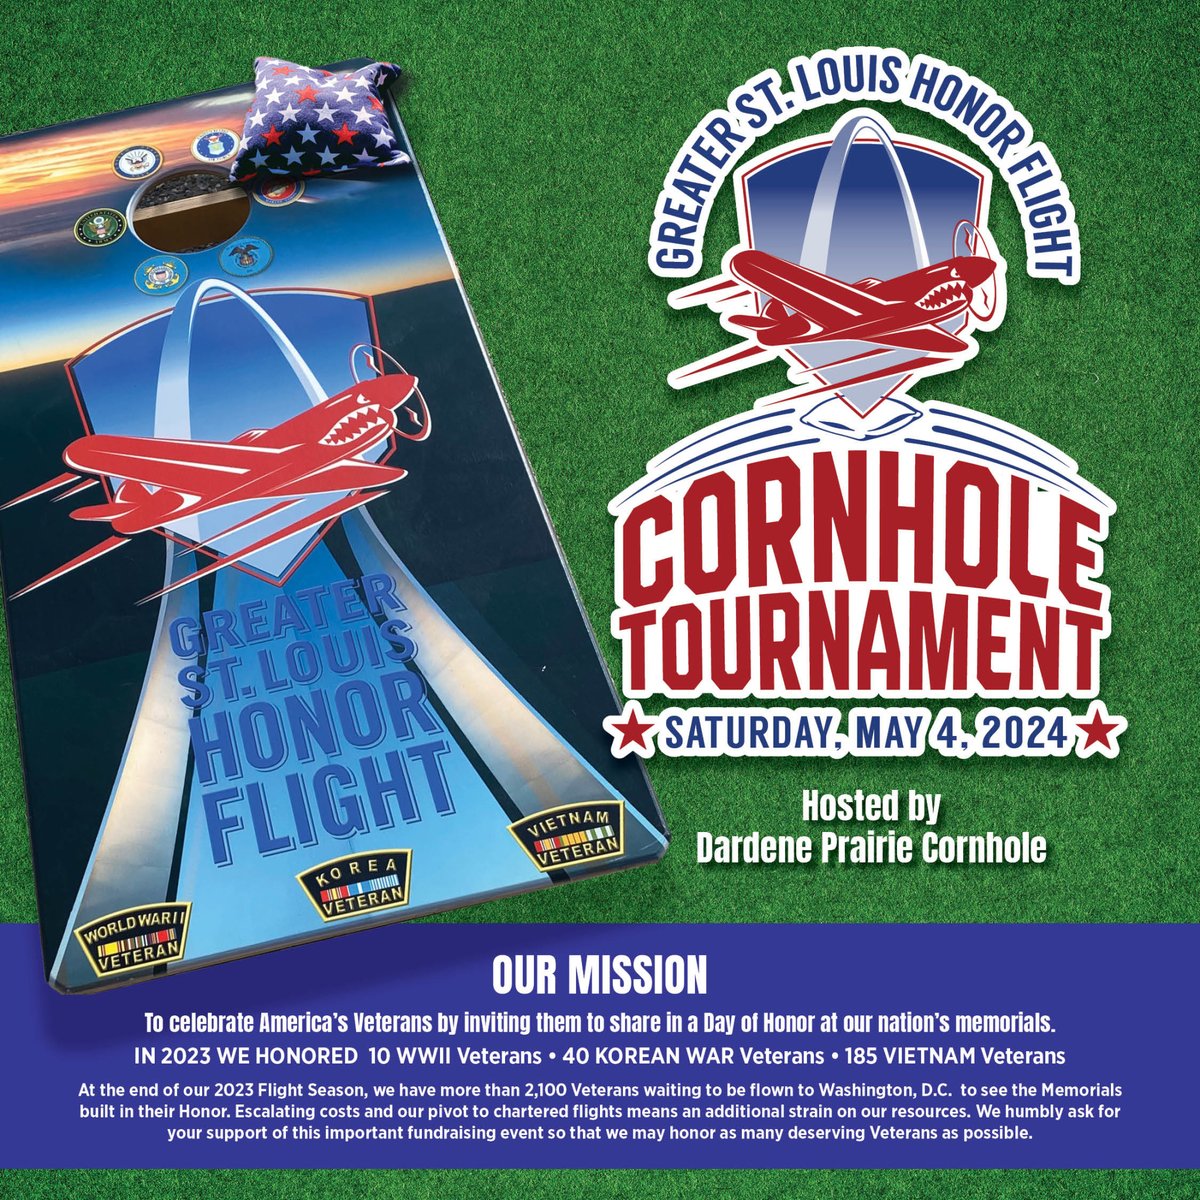 🌟 Join us for a day of fun & philanthropy! 🌟 Register for our Cornhole Tournament in support of our mission. 🏆🌽
📅 5/4/24
⏰ 10a
📍 The Hitting Zone • O'Fallon, MO
✅ bit.ly/GSLHF24Cornhole
Make a meaningful impact in the lives of our Vets!.  #CornholeForACause #honorflight